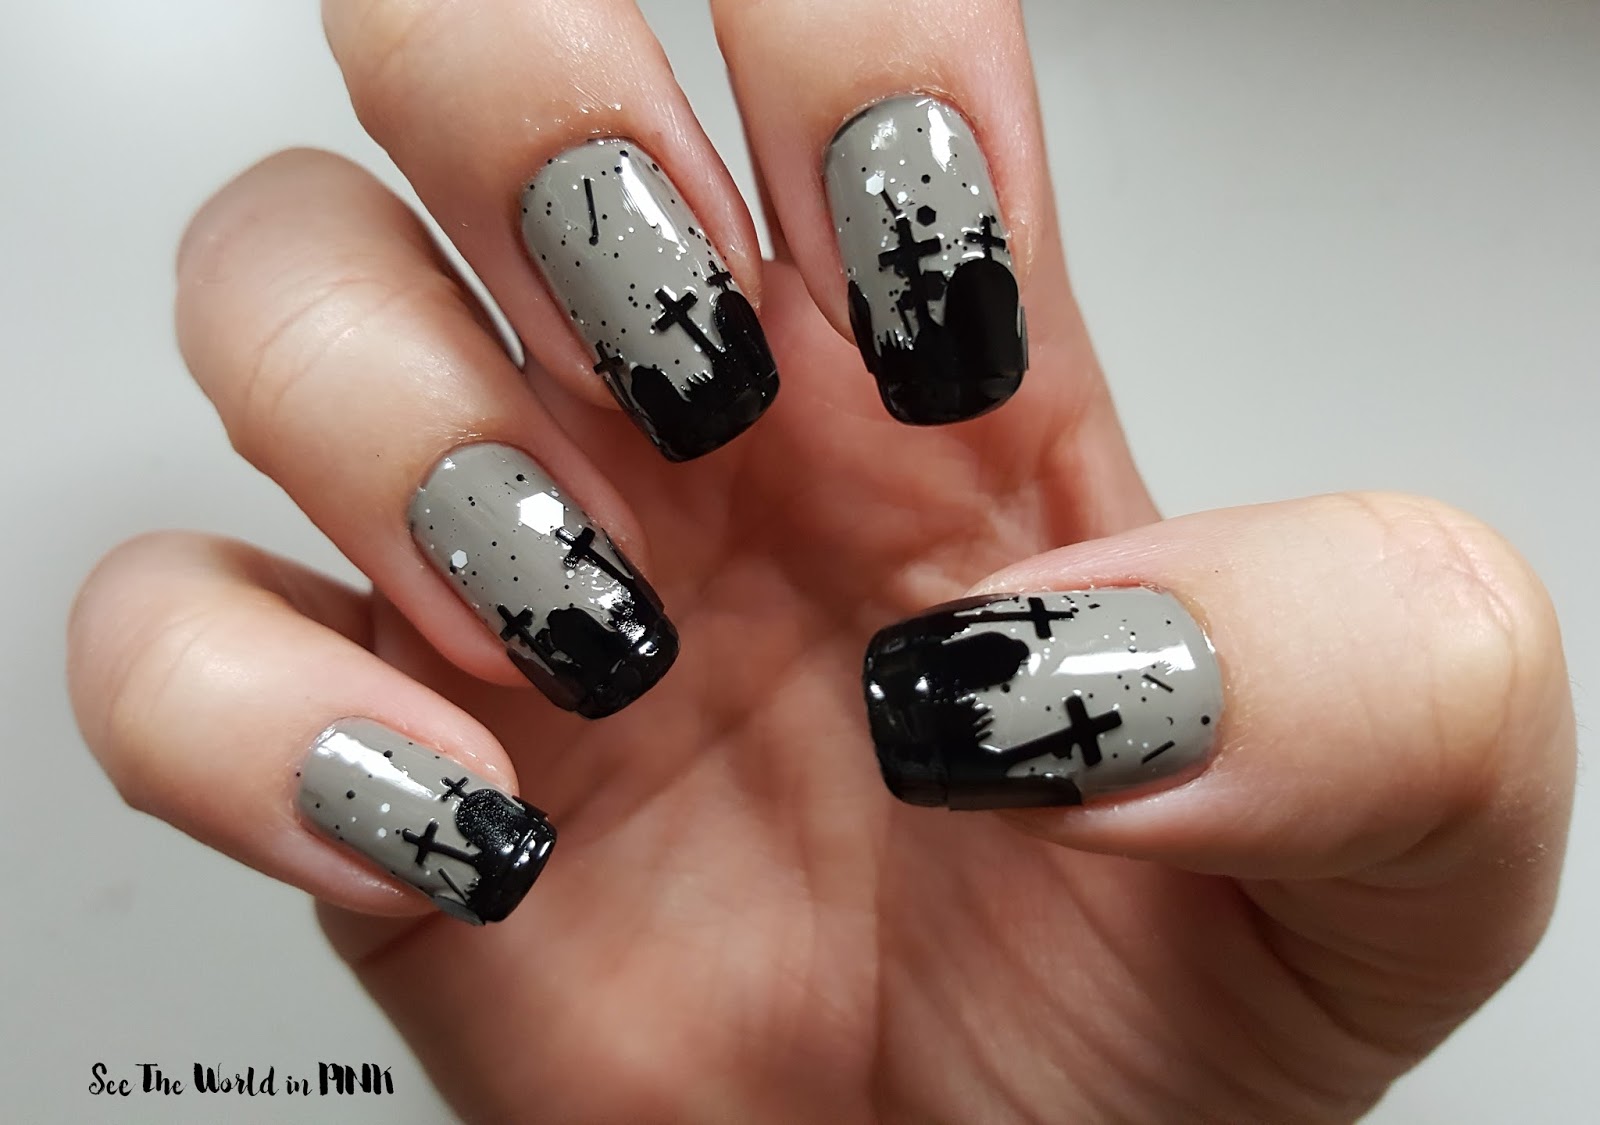 Manicure Monday - Graveyard Nails! | See the World in PINK